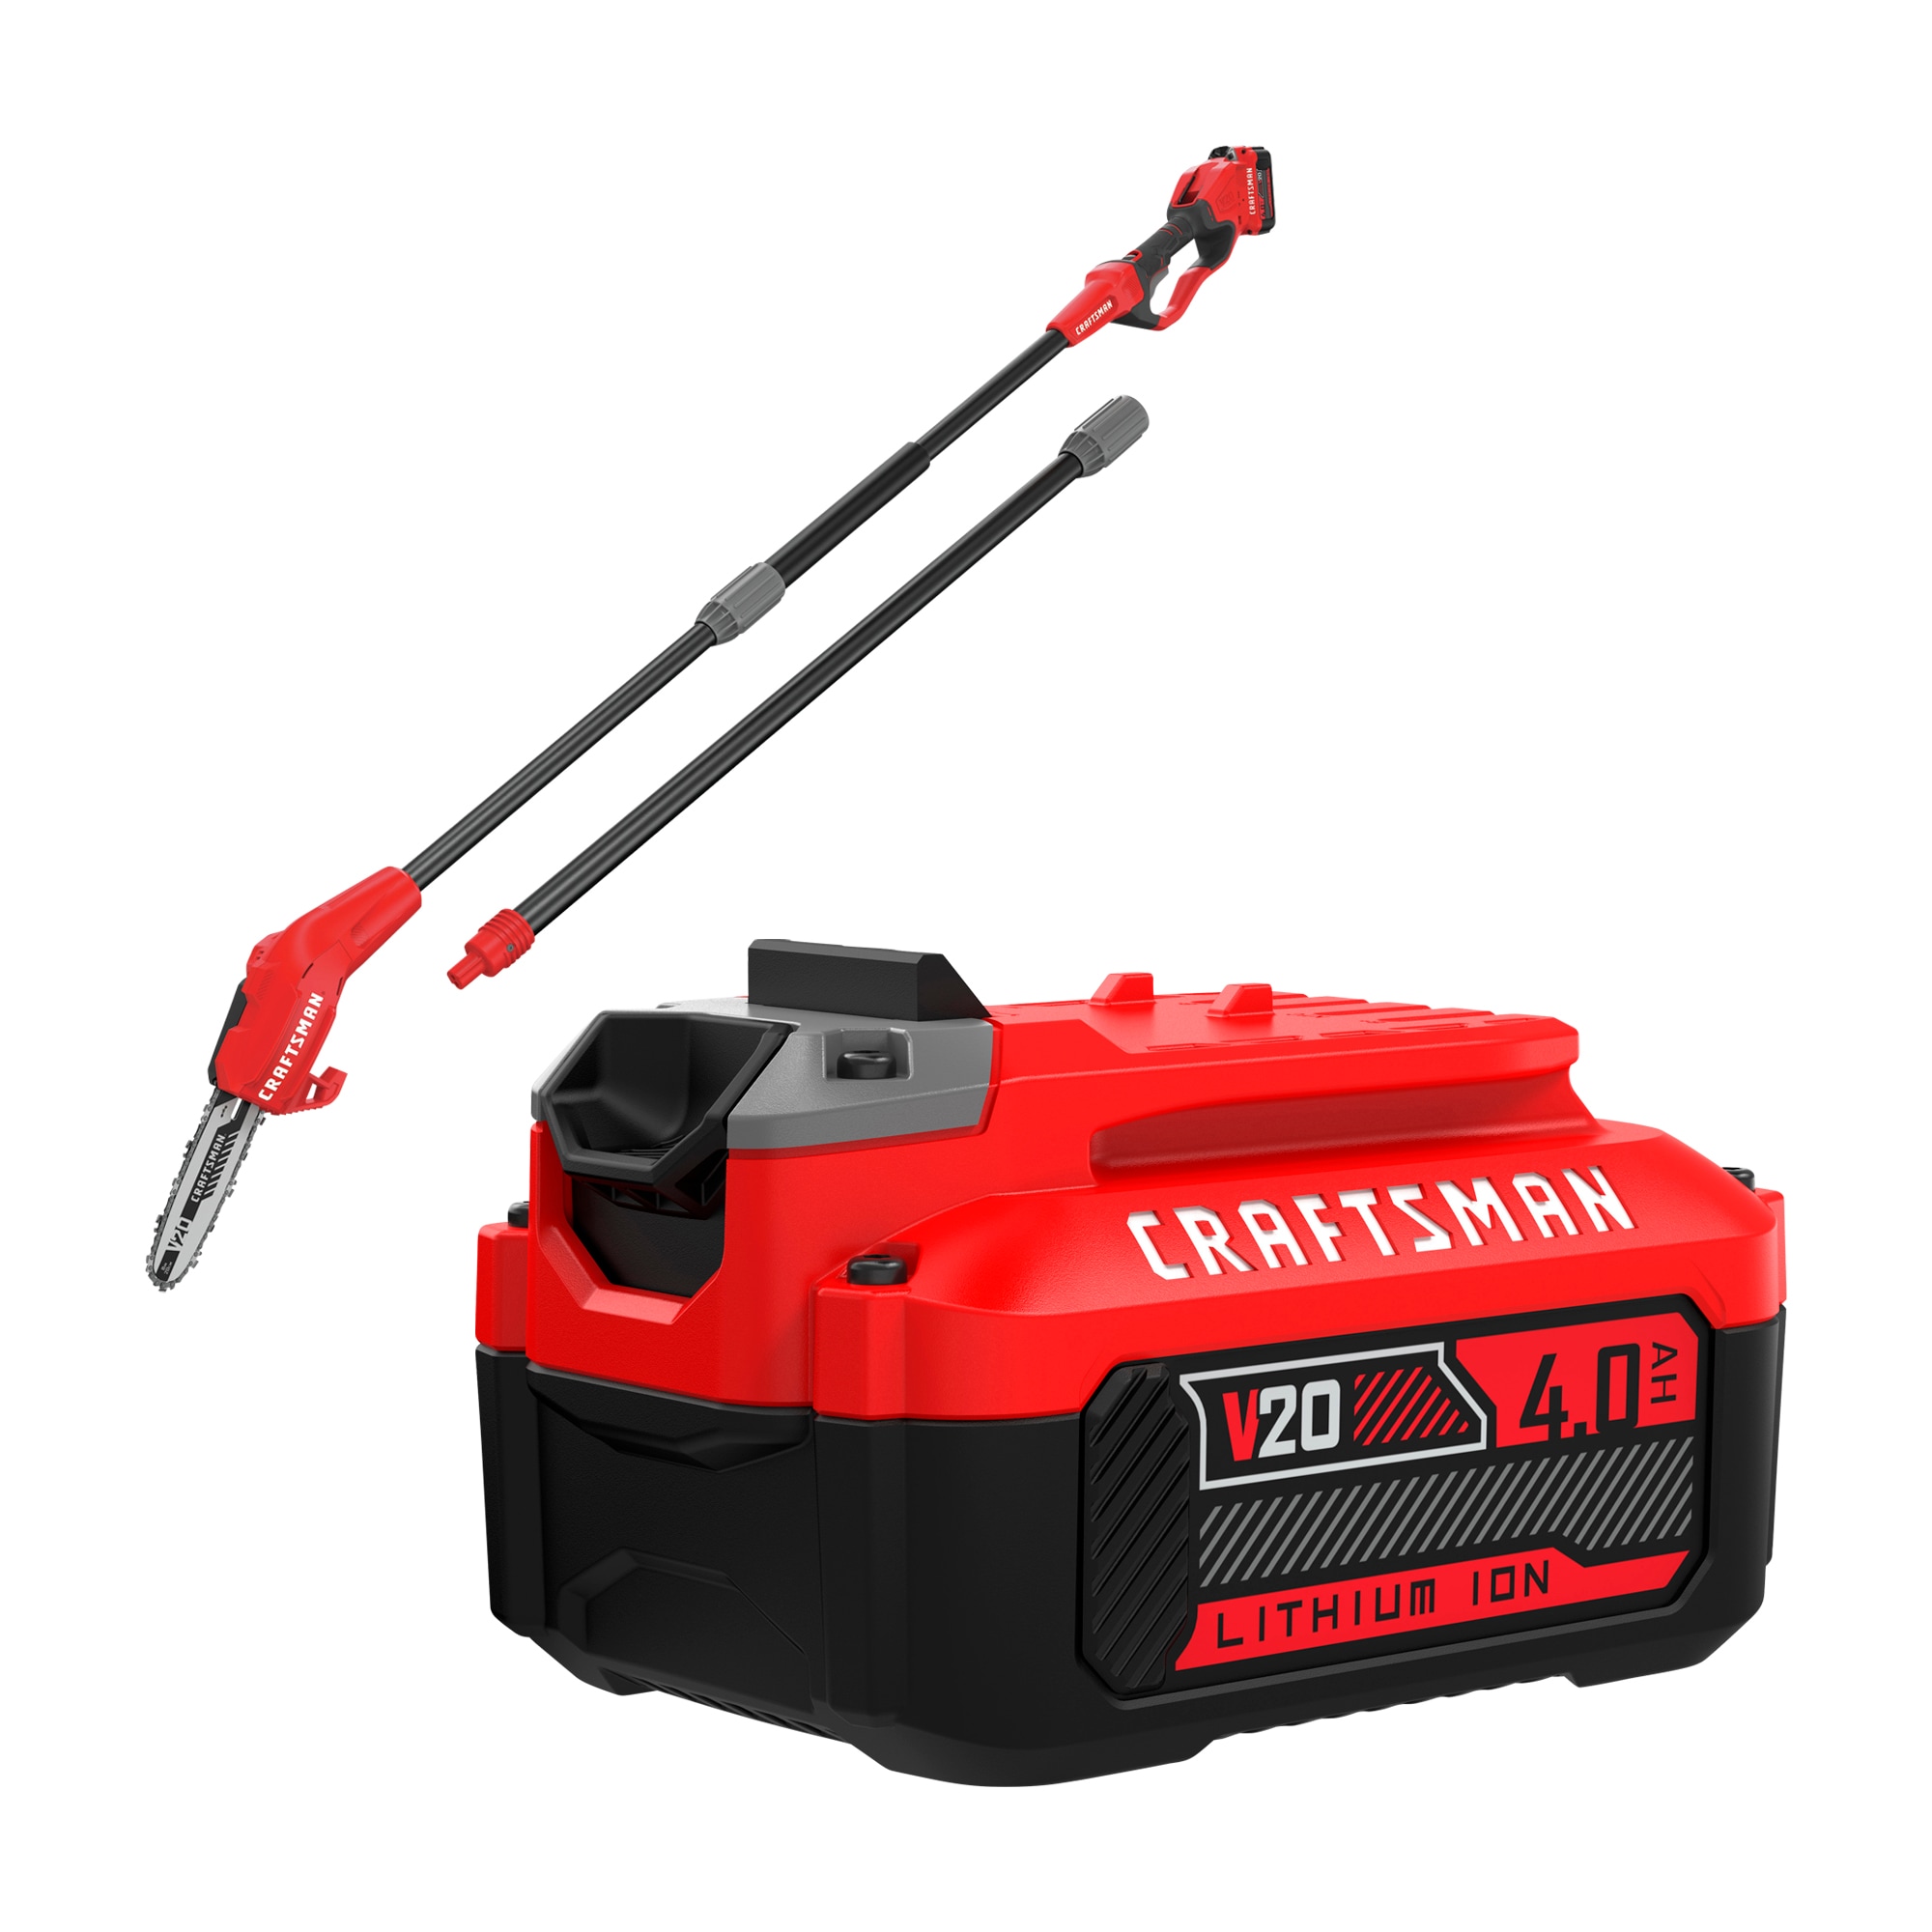 CRAFTSMAN V20 20-V Lithium-ion Battery (4 Ah) in the Power Tool